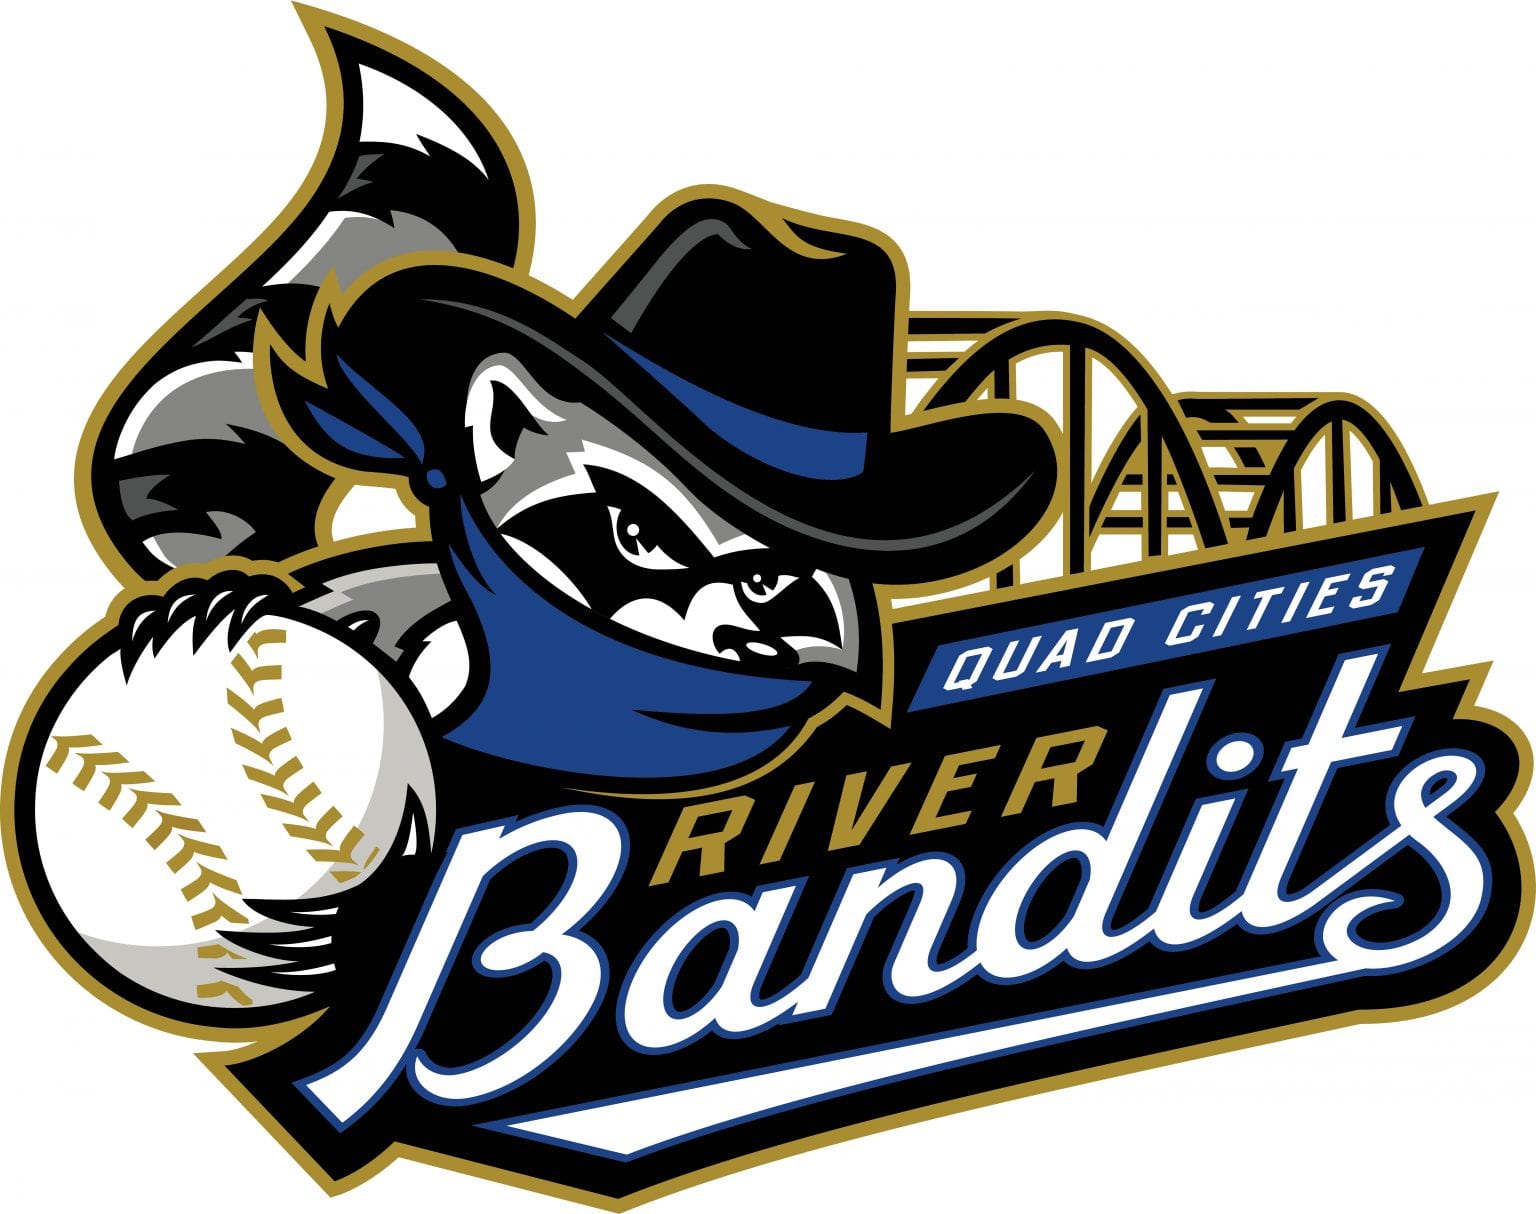 River Bandits Announce Challenge Grant To Support Genesis Children’s